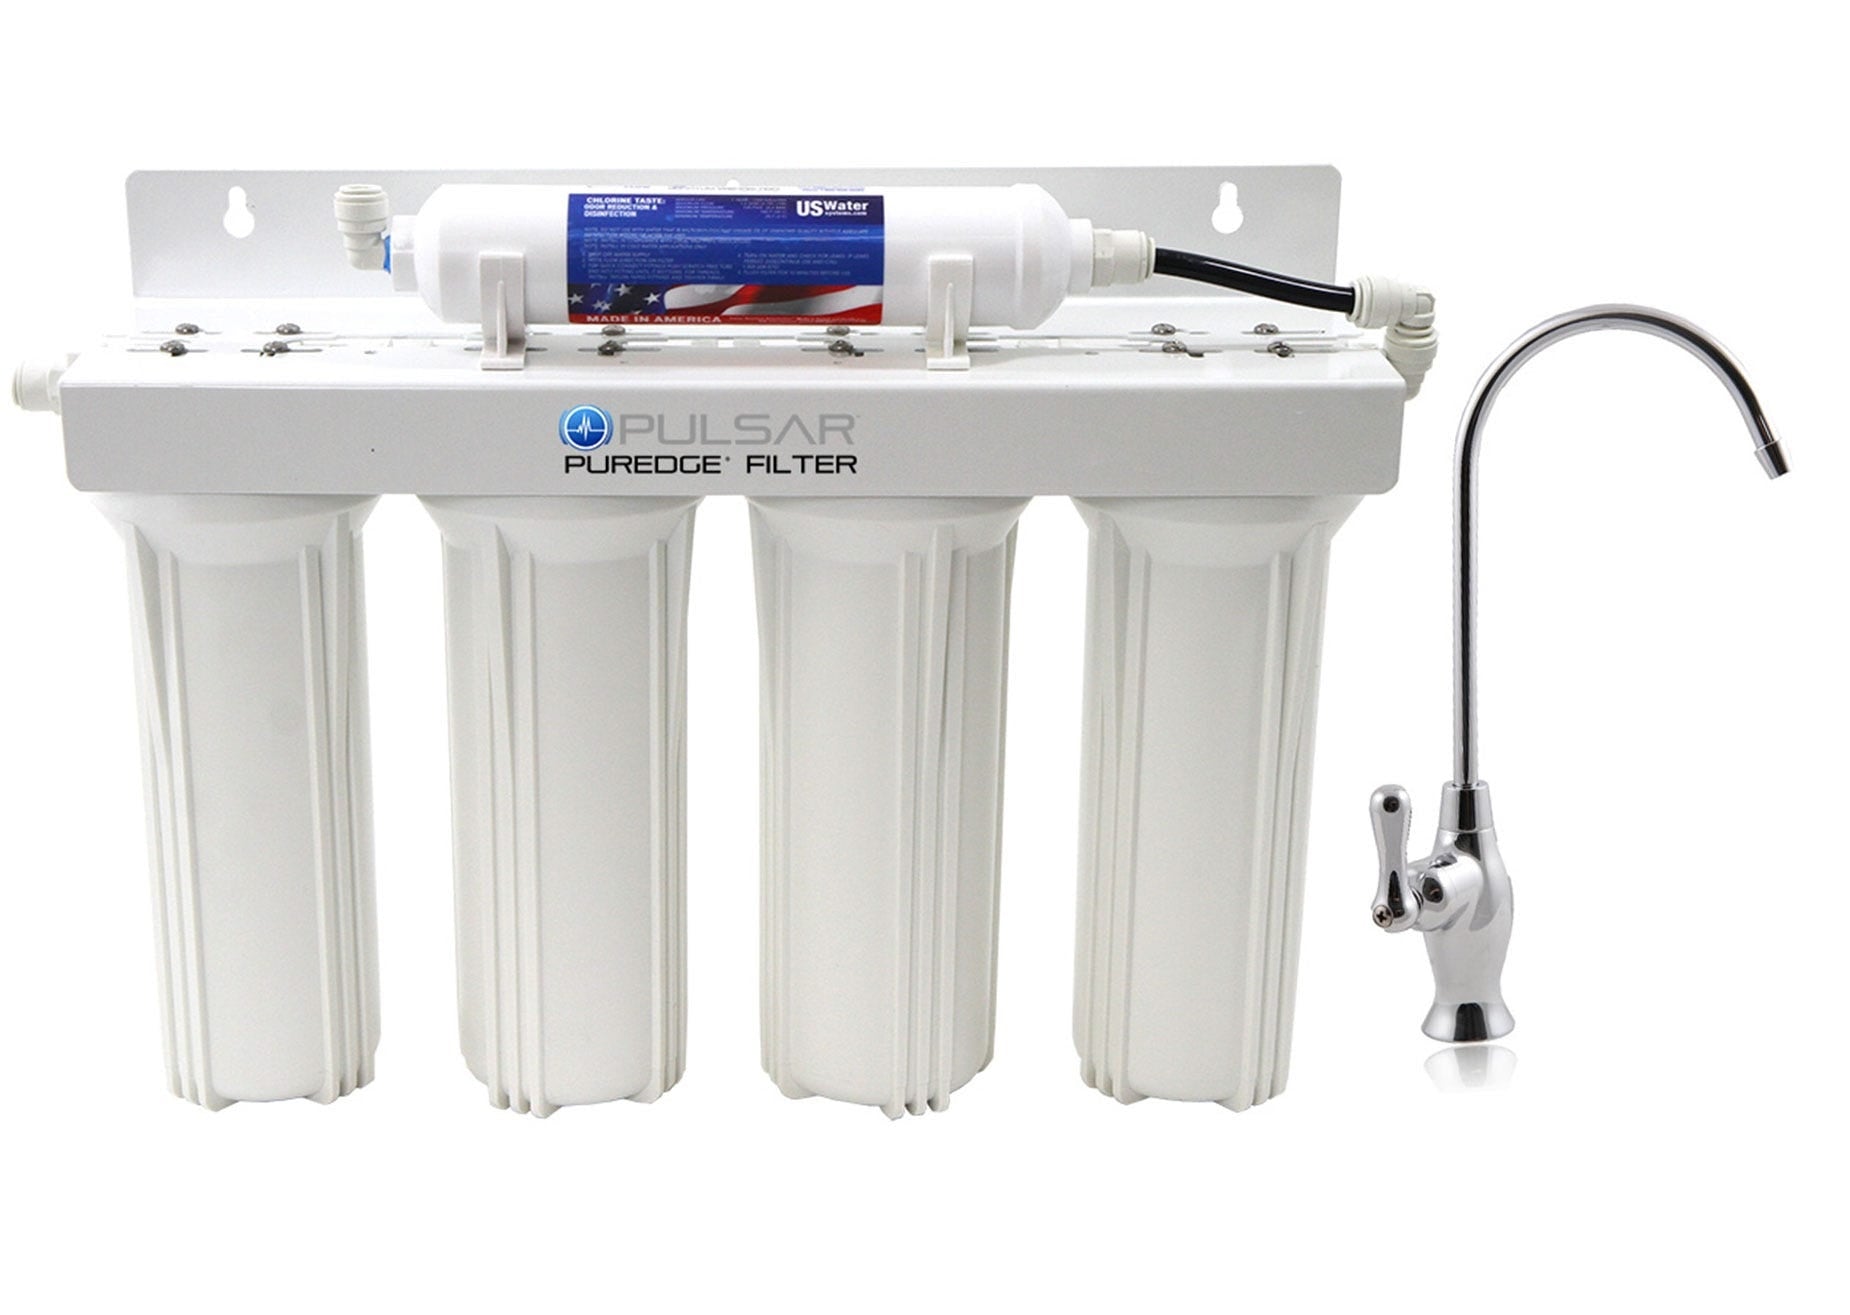 US Water PurEdge5 Five-Stage Drinking Water Purification System